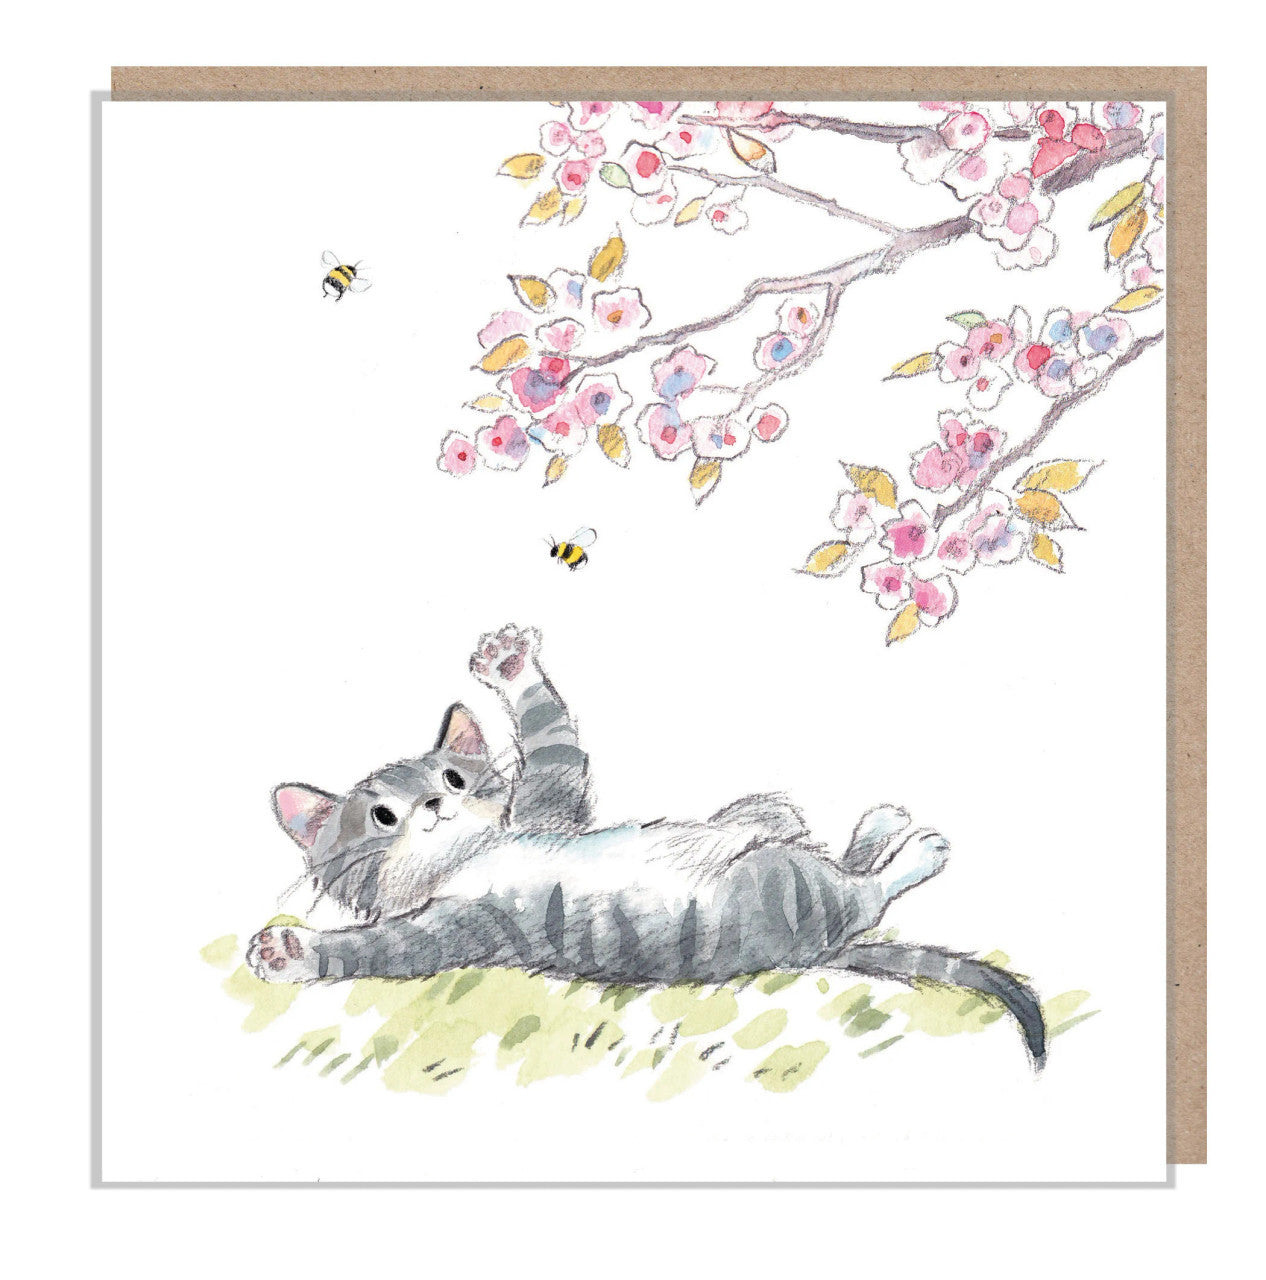 Cat Under Blossom Tree Greetings Card by Paper Shed Design